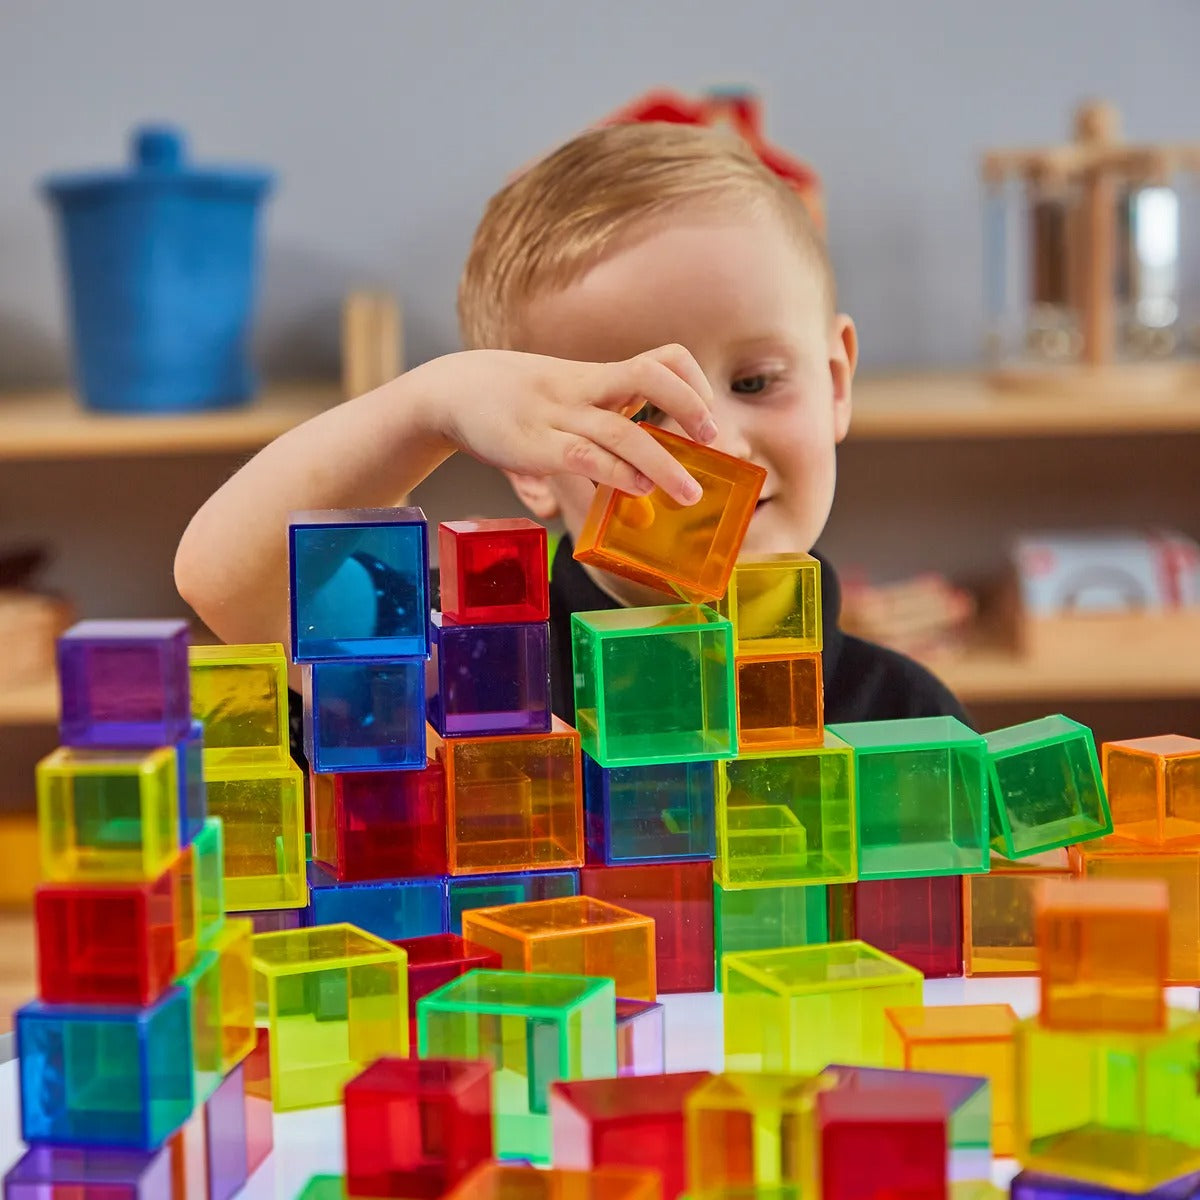 54 Pack Translucent Cube Set, An engaging alternative to traditional wooden sets, our Translucent Cubes add colours and difference to your classroom. The Translucent Cube Set are manufactured from a hardwearing but lightweight plastic, this pack of 54 Translucent cubes come in a range of bright and bold colours with flat surfaces allowing the Translucent cubes to be stacked on top of each other. Alternatively, use the Translucent cubes to educate your pupils on patterns, sequencing or general shapes with ea